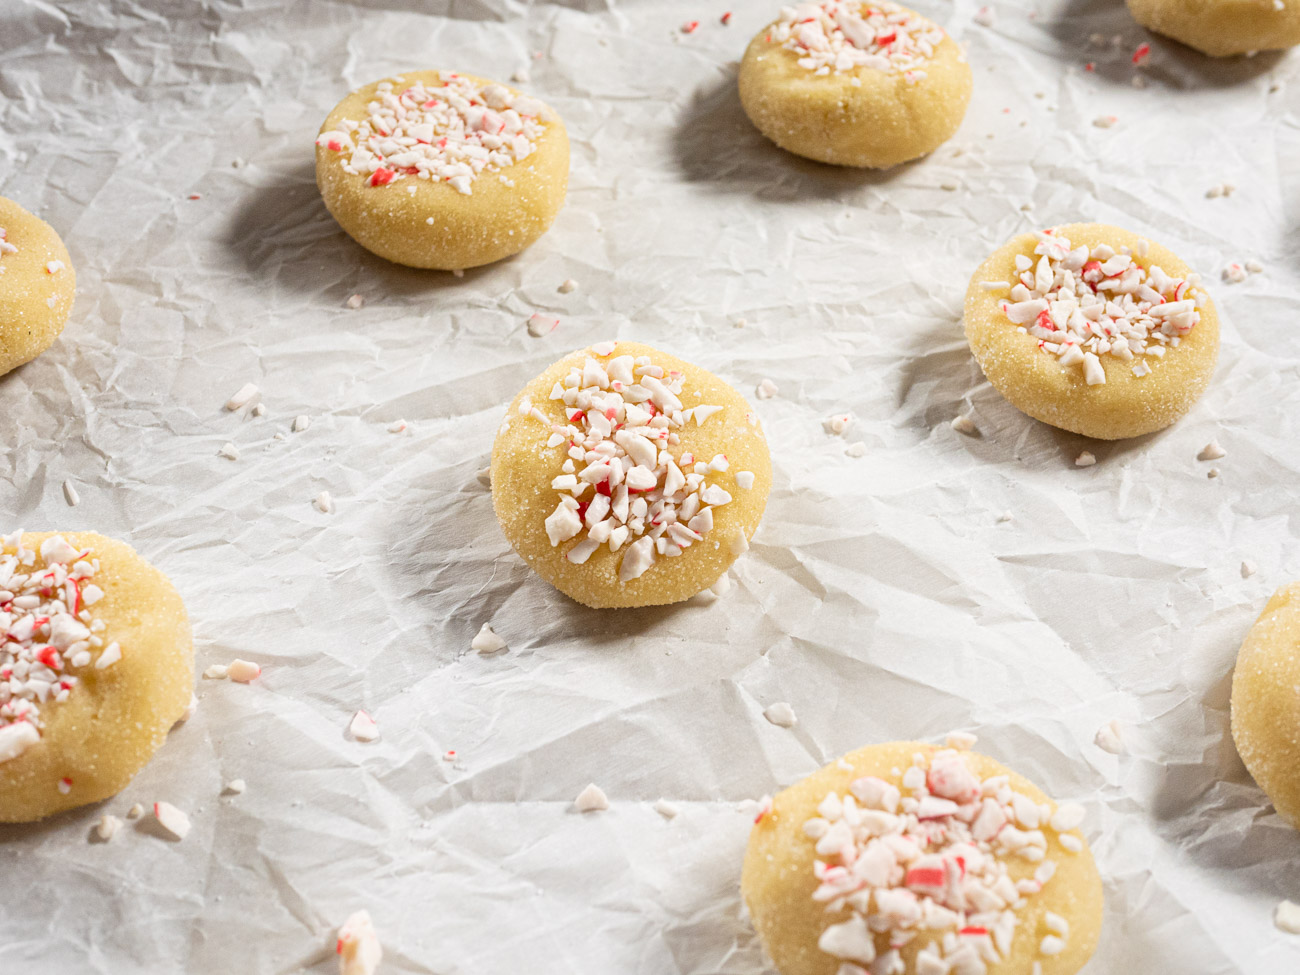 Spread cookies 2 inches apart on lined of greased baking sheets and slightly flatten each one. Top with crushed peppermint candy.